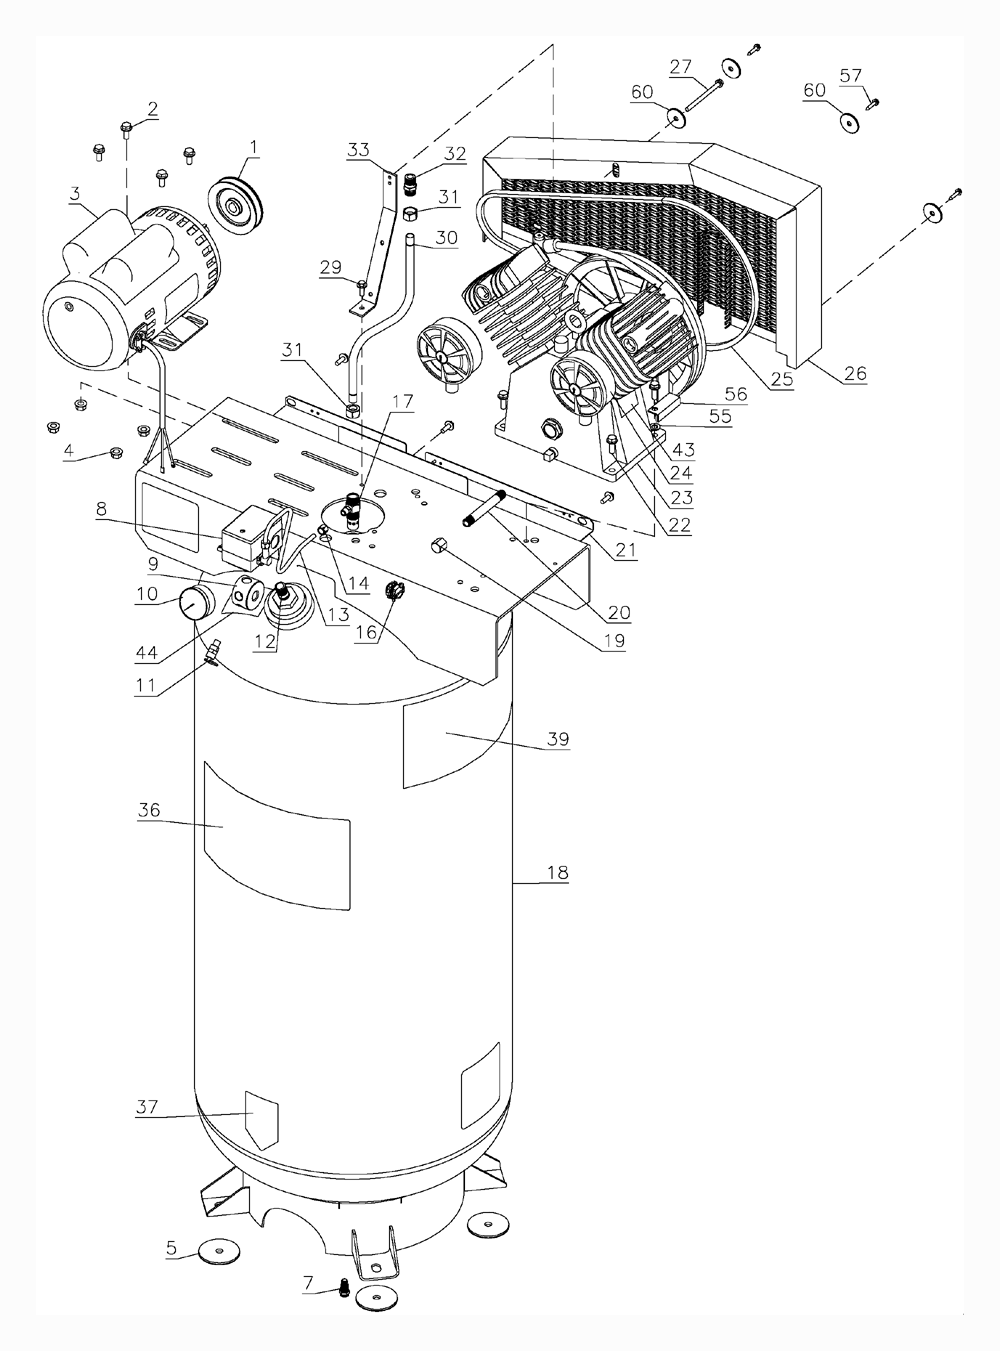 Buy Porter Cable C7510 3 0 Hp 135 Psi 60 Gallon Stationary Vertical Replacement Tool Parts Porter Cable C7510 Diagram